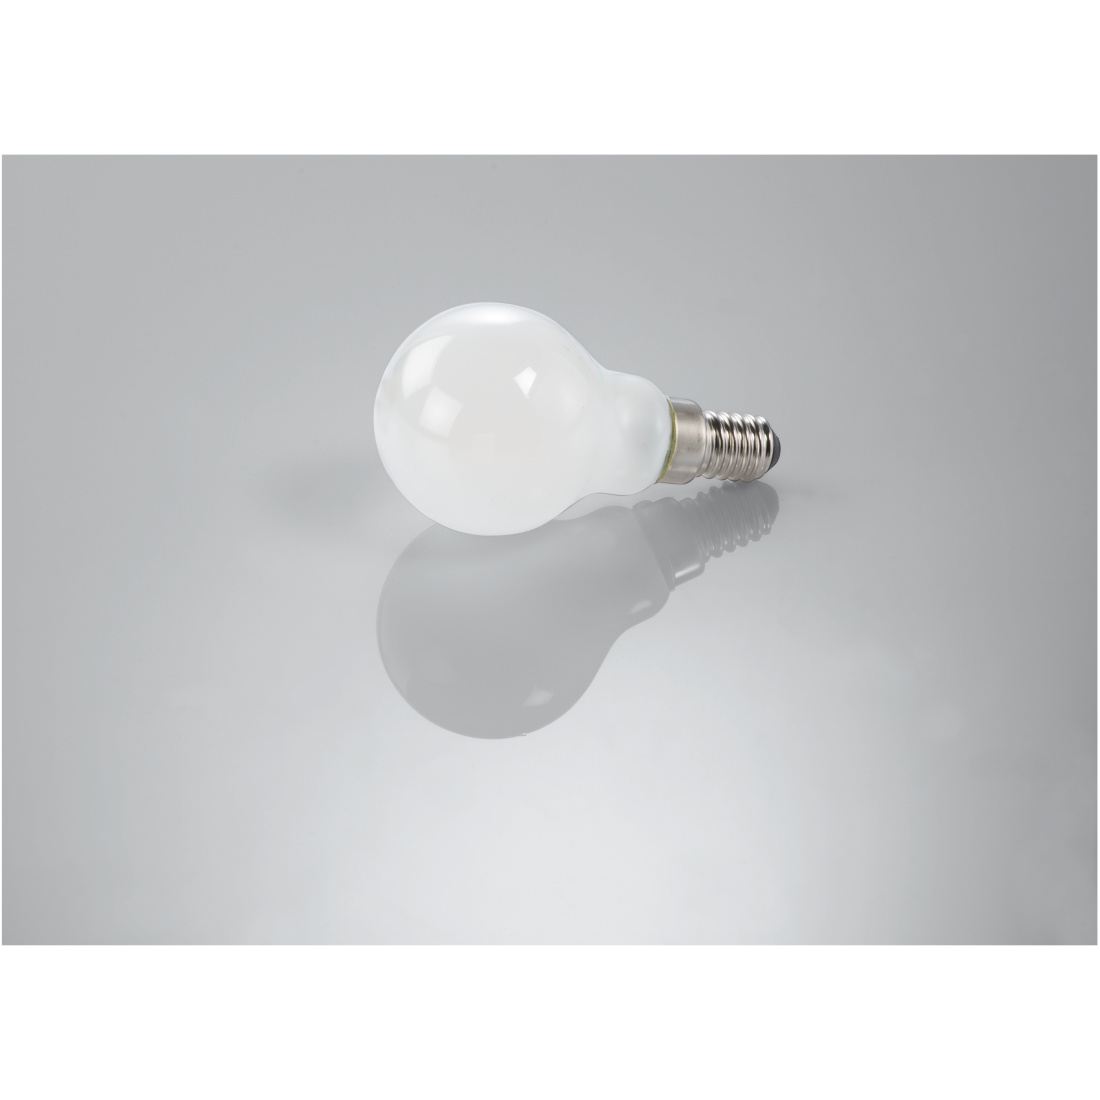 abx3 High-Res Image 3 - Xavax, LED Filament, E14, 470 lm Replaces 40W, Drop Bulb, Matt, warm white, dimmable